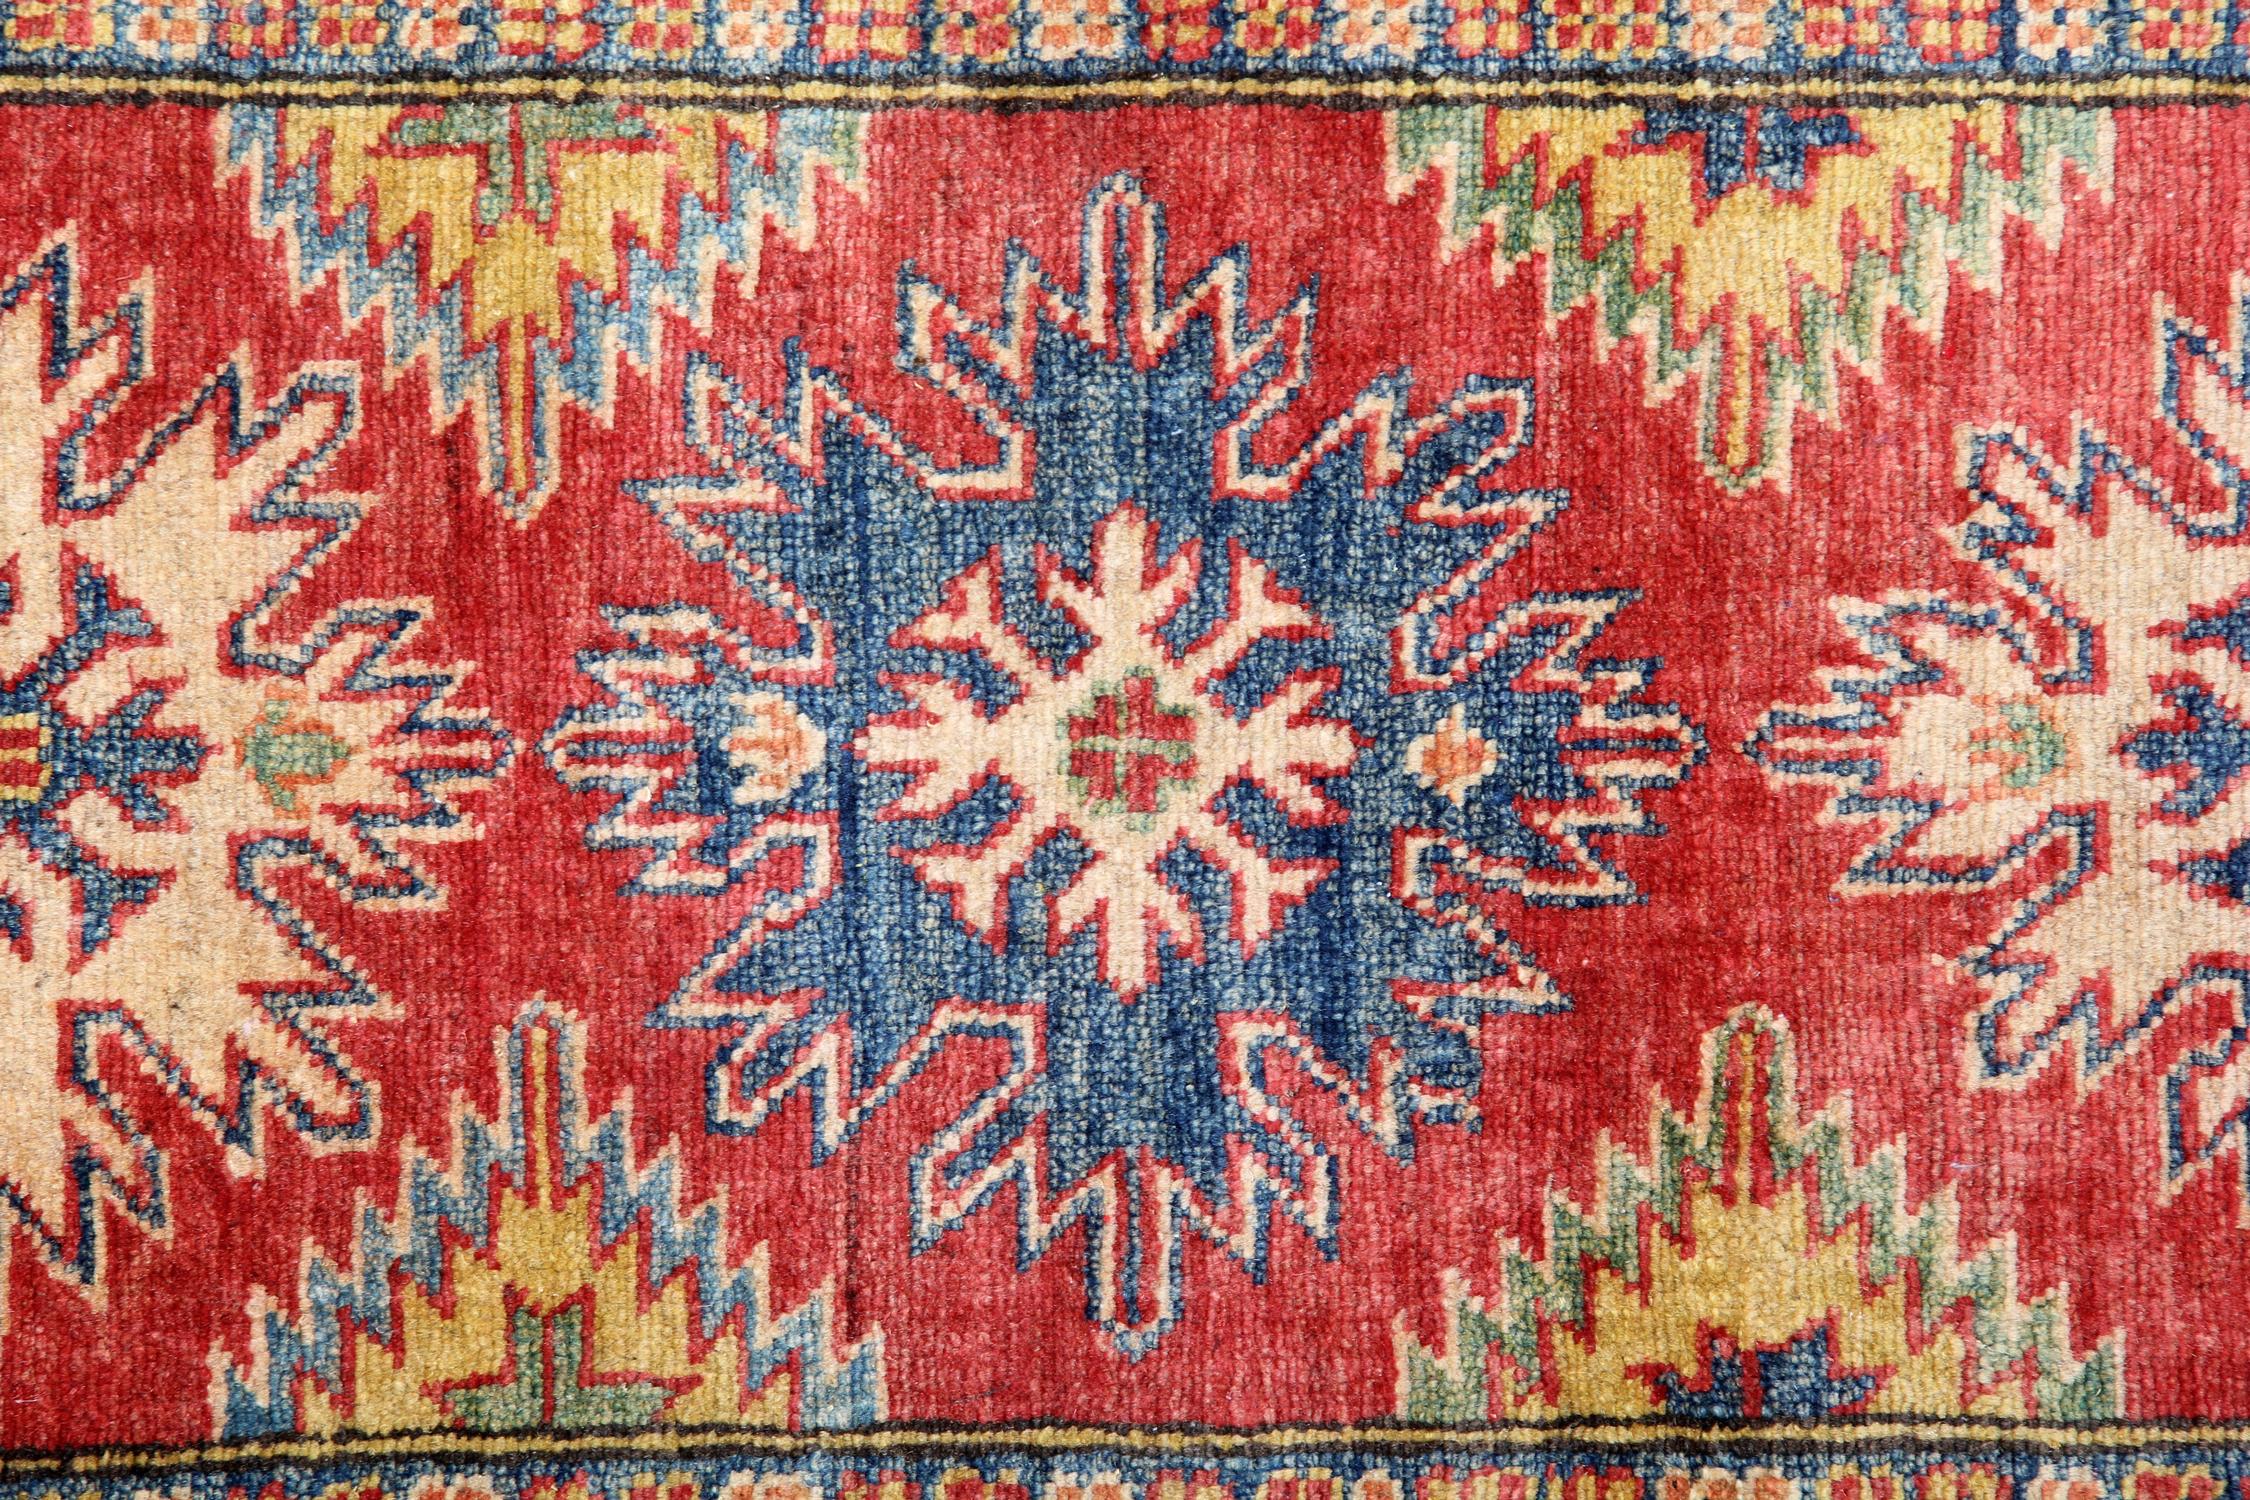 This handmade carpet runner's new traditional handwoven Kazak rug comes in a striking colour combination. This red rug has cream, red, blue and caramel accent colours woven through both the centre and border. The pattern depicted on this hand-woven